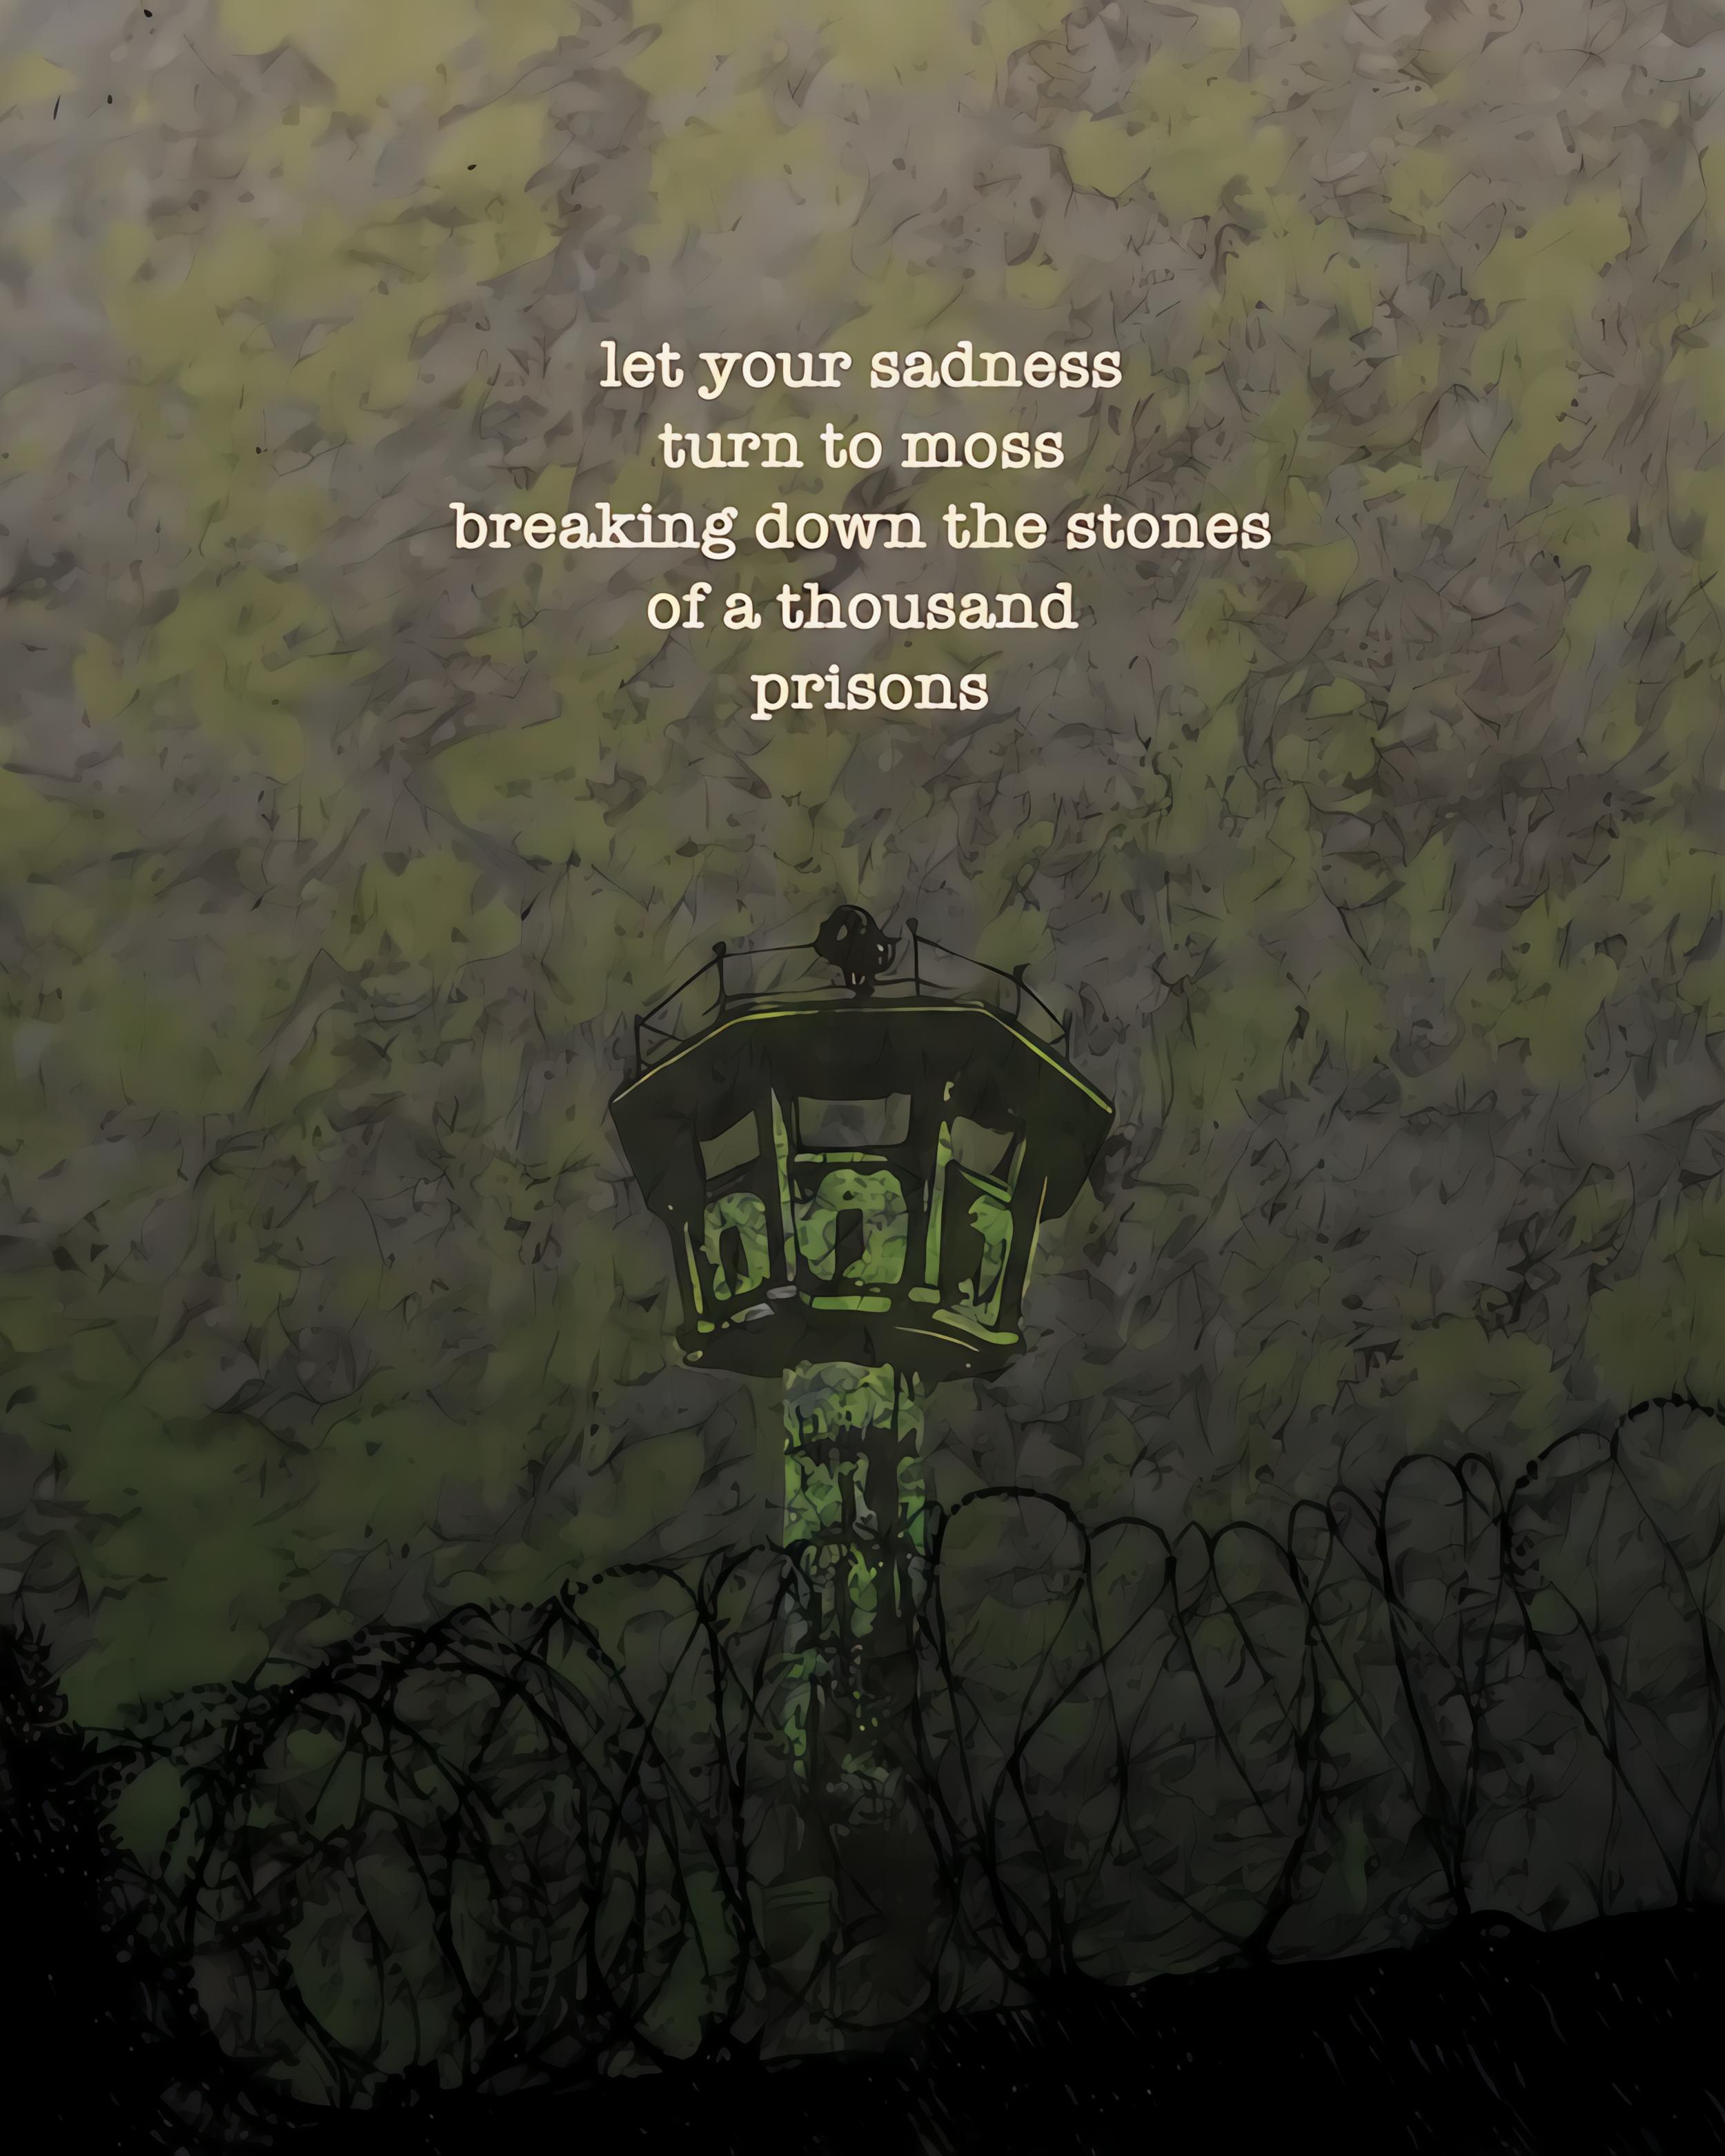 Let your sadness turn to moss breaking down the stones of thousand prisons